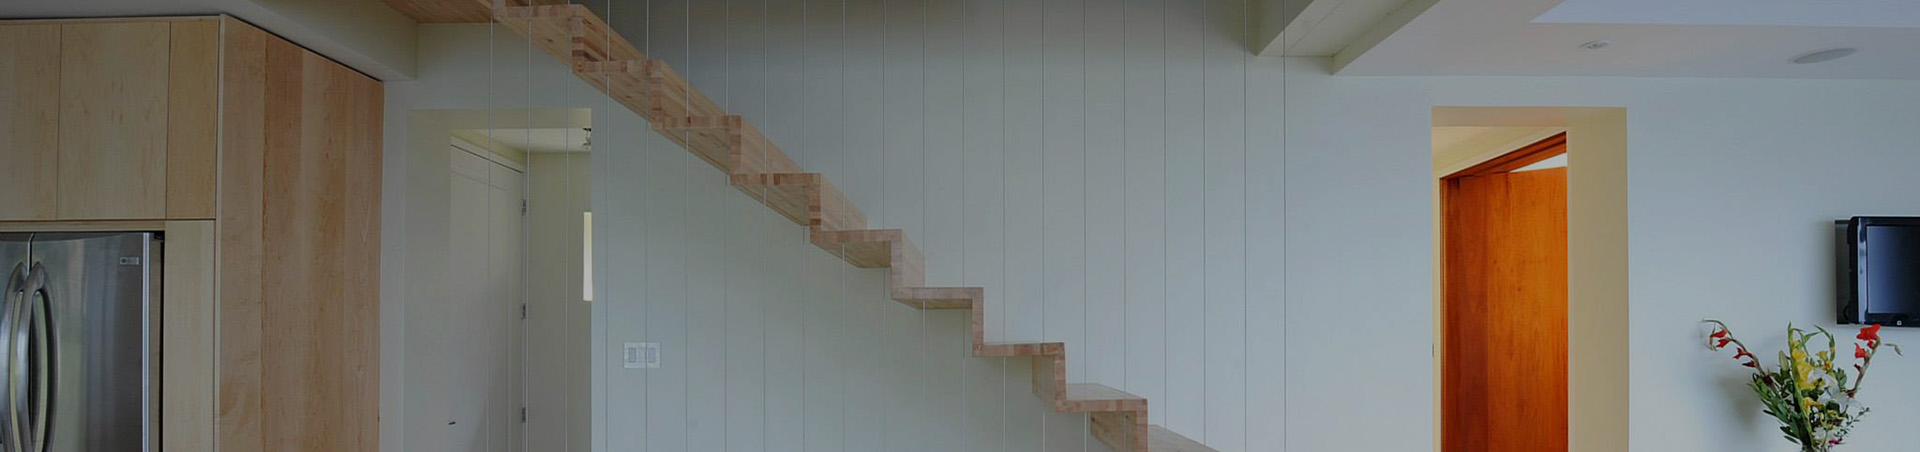 Floating-Staircase-13